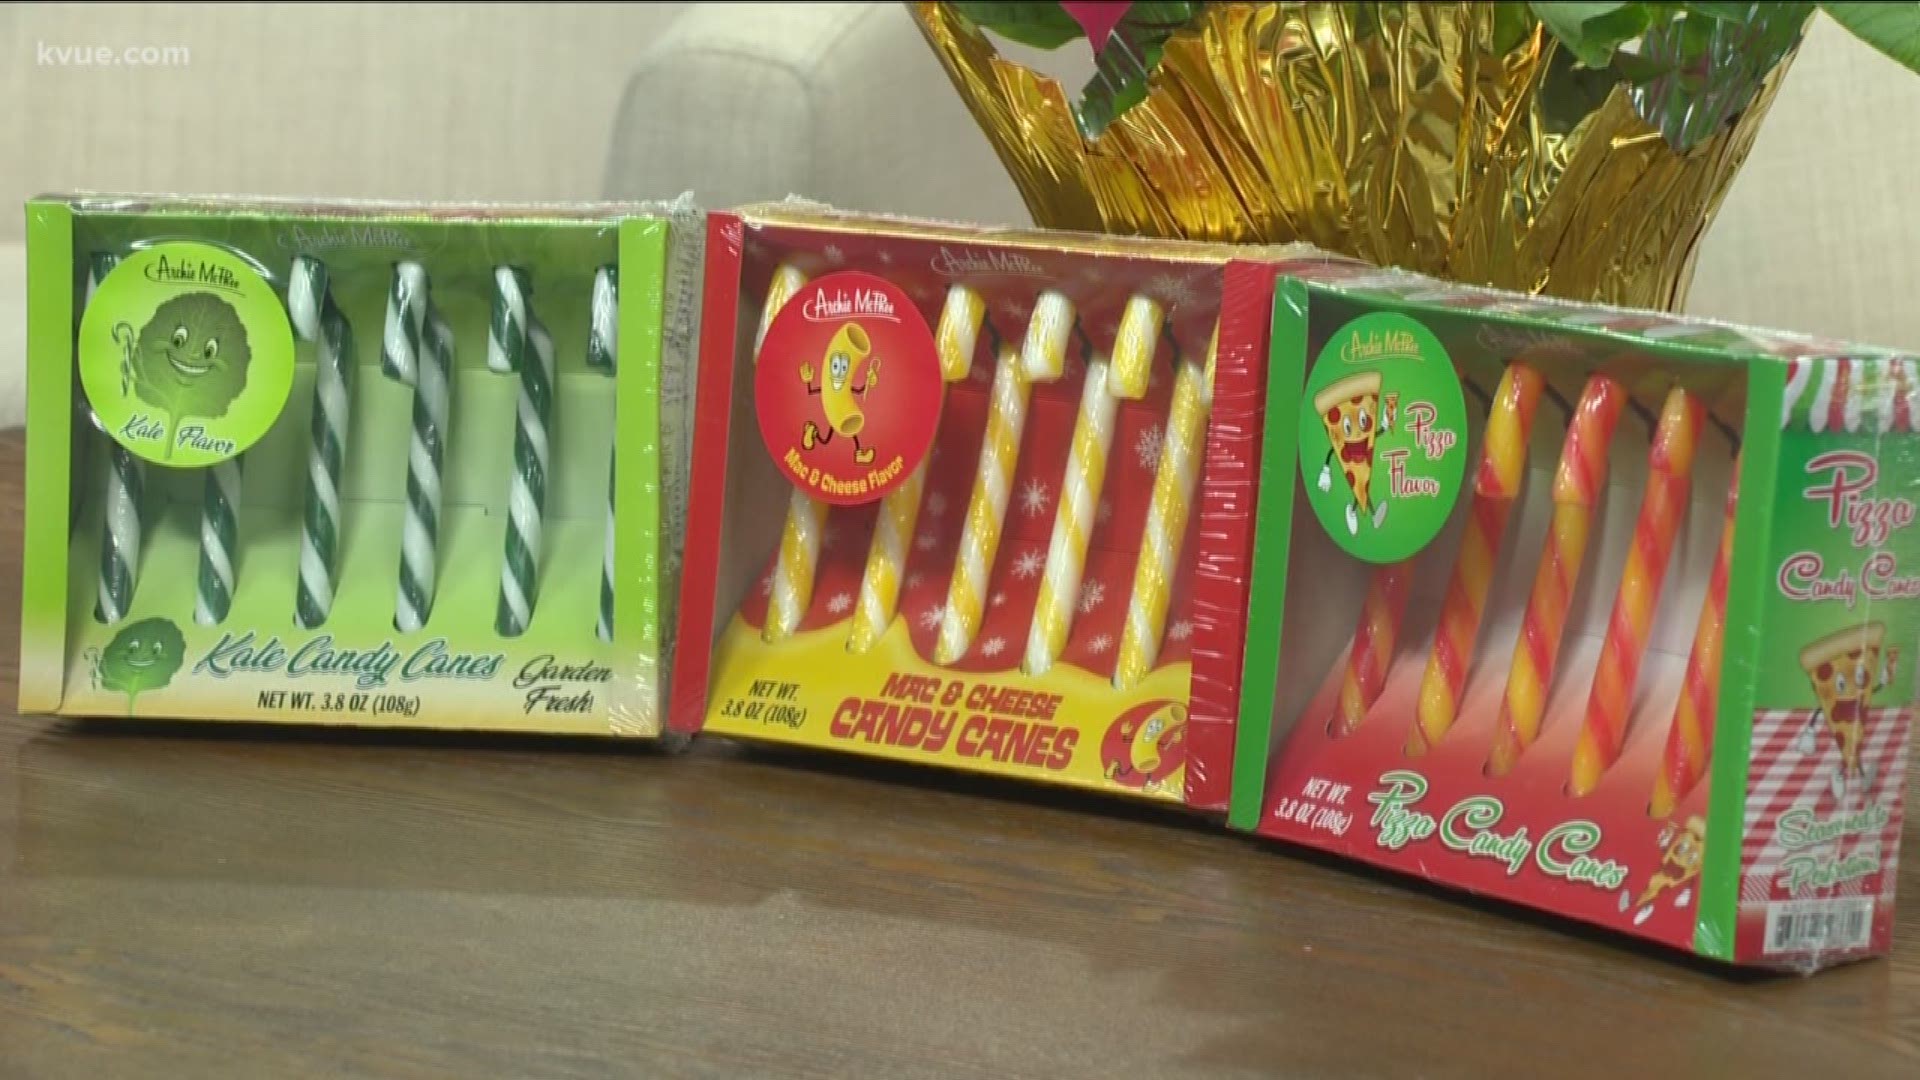 Will these candy canes from Archie McPhee give you the Christmas cheer you've been hungering for?